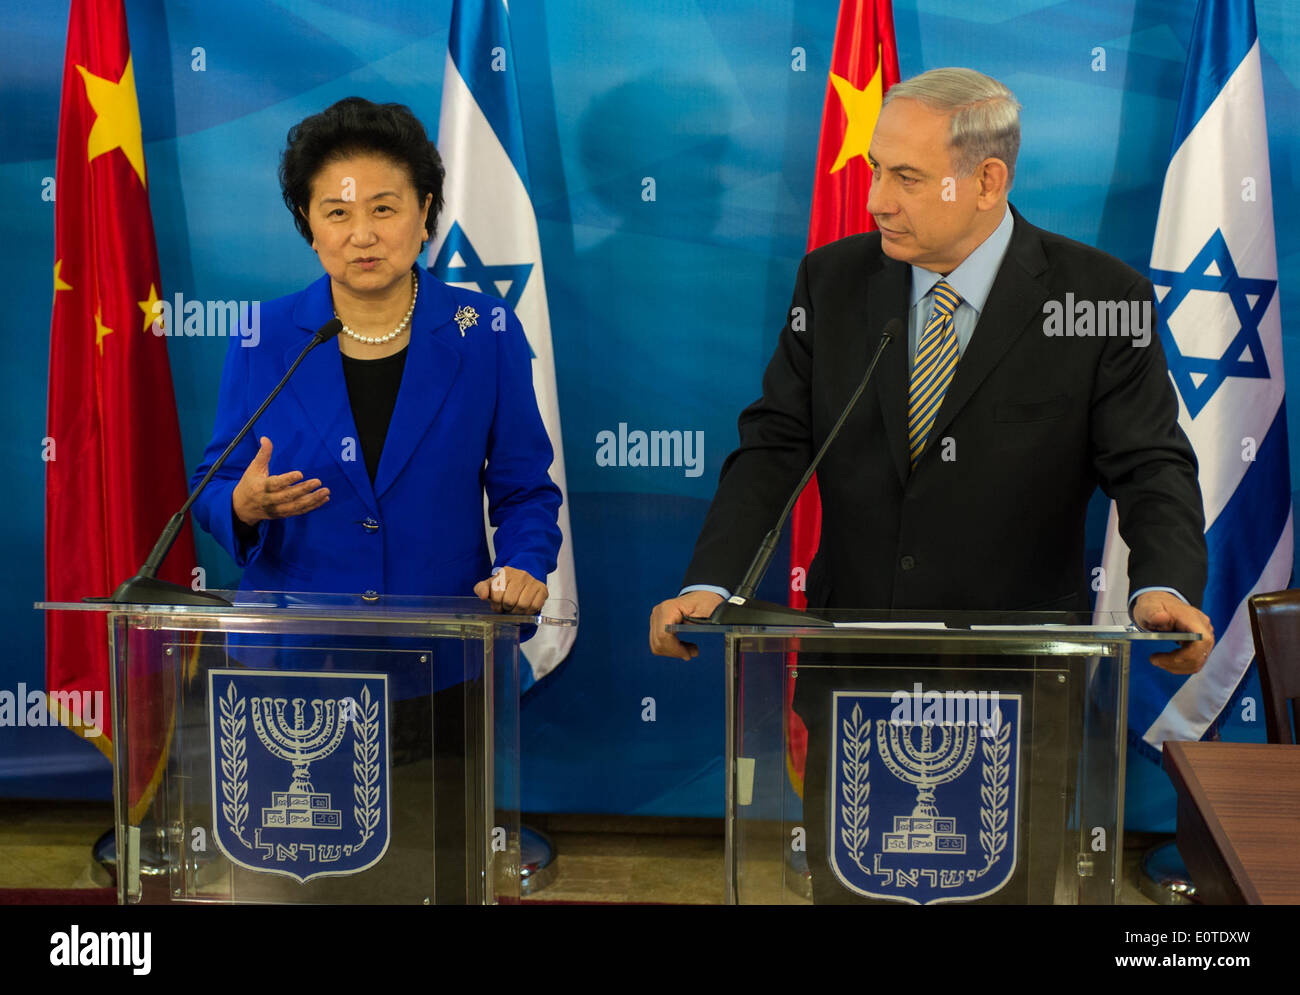 Jerusalem. 19th May, 2014. Chinese Vice Premier Liu Yandong (L) attends a news conference with Israeli Prime Minister Benjamin Netanyahu at the Prime Minister's Office in Jerusalem, on May 19, 2014. © Li Rui/Xinhua/Alamy Live News Stock Photo